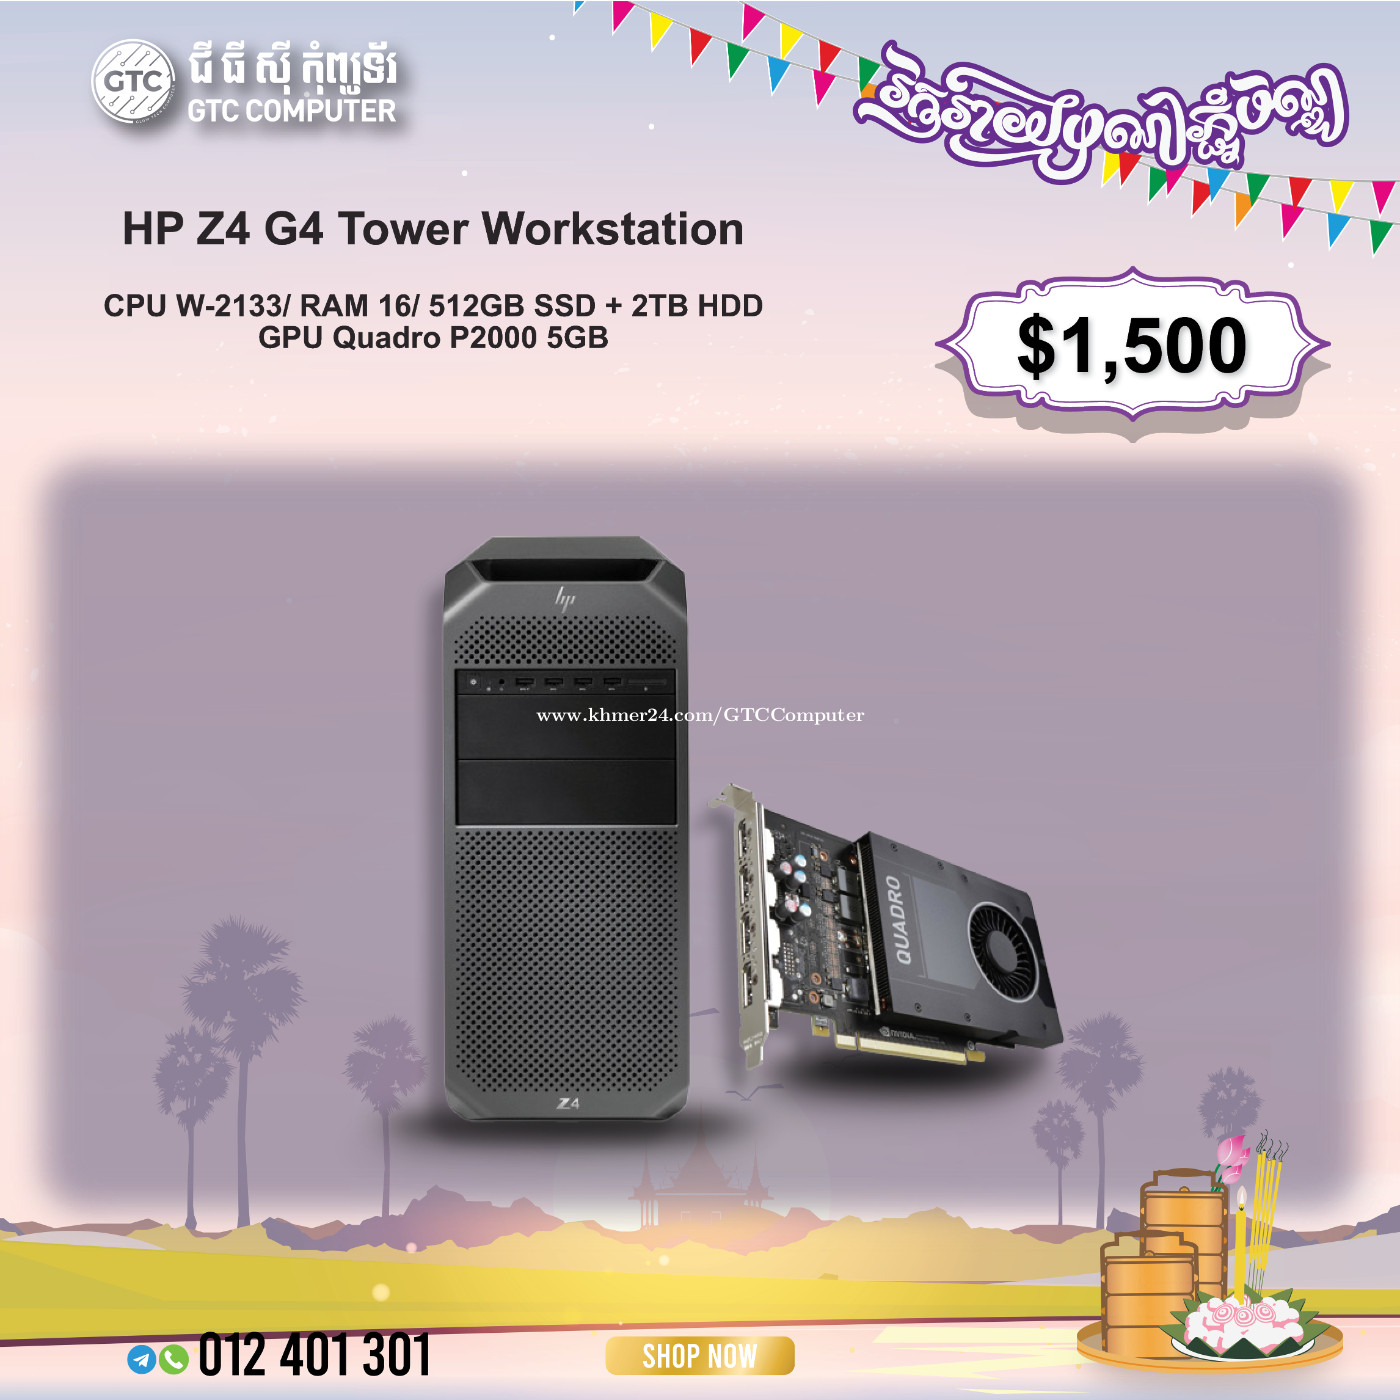 HP Z4 G4 Tower Workstation Price $1500.00 in Veal Vong, Cambodia